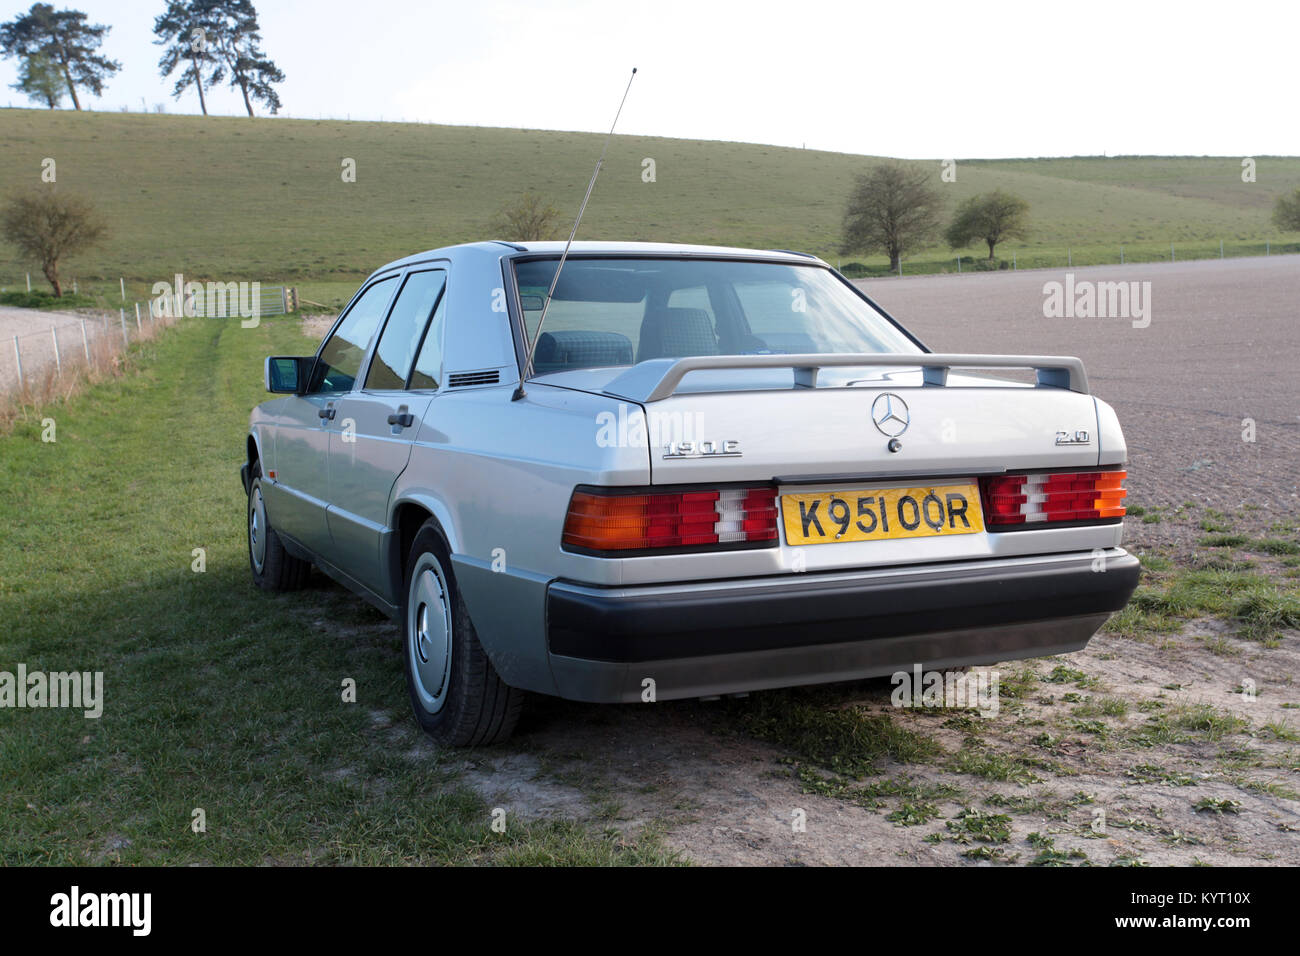 An immaculate example of a 1993 Mercedes Benz 190e in the English countryside. A car built to famously high standards in Germany. Circa 2017. Stock Photo